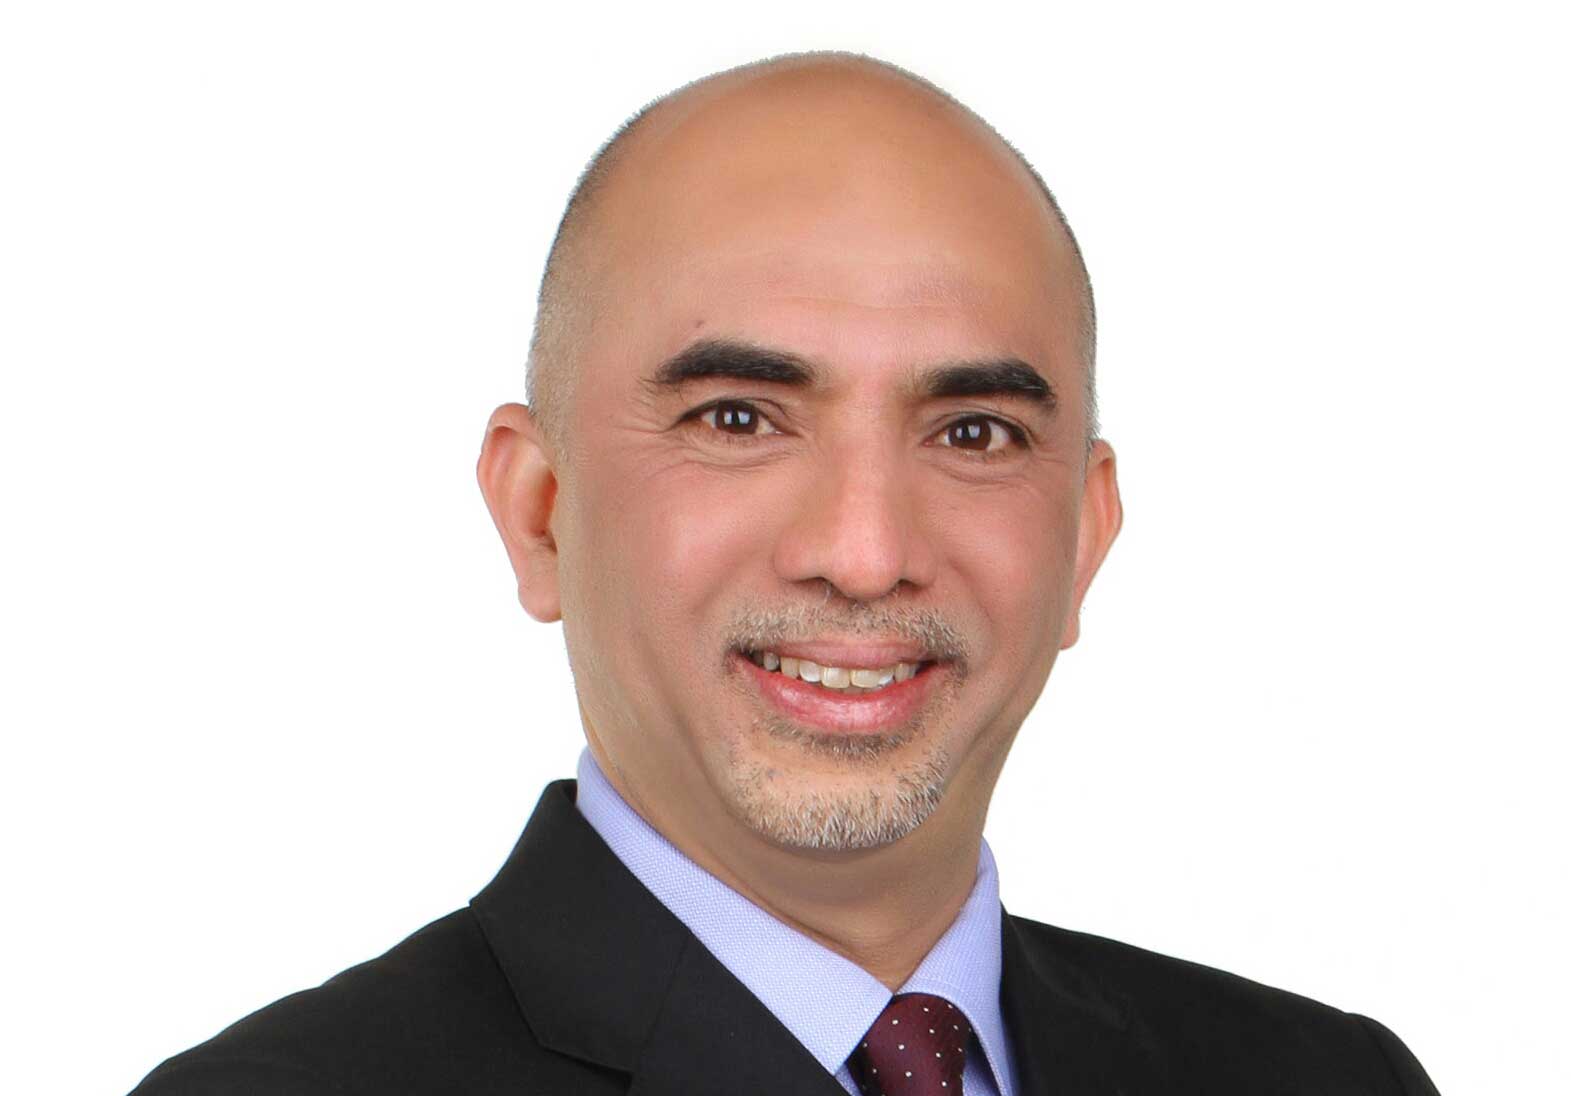 Profile Picture of K Raman, Managing Director of Microsoft Malaysia in Suit and Tie